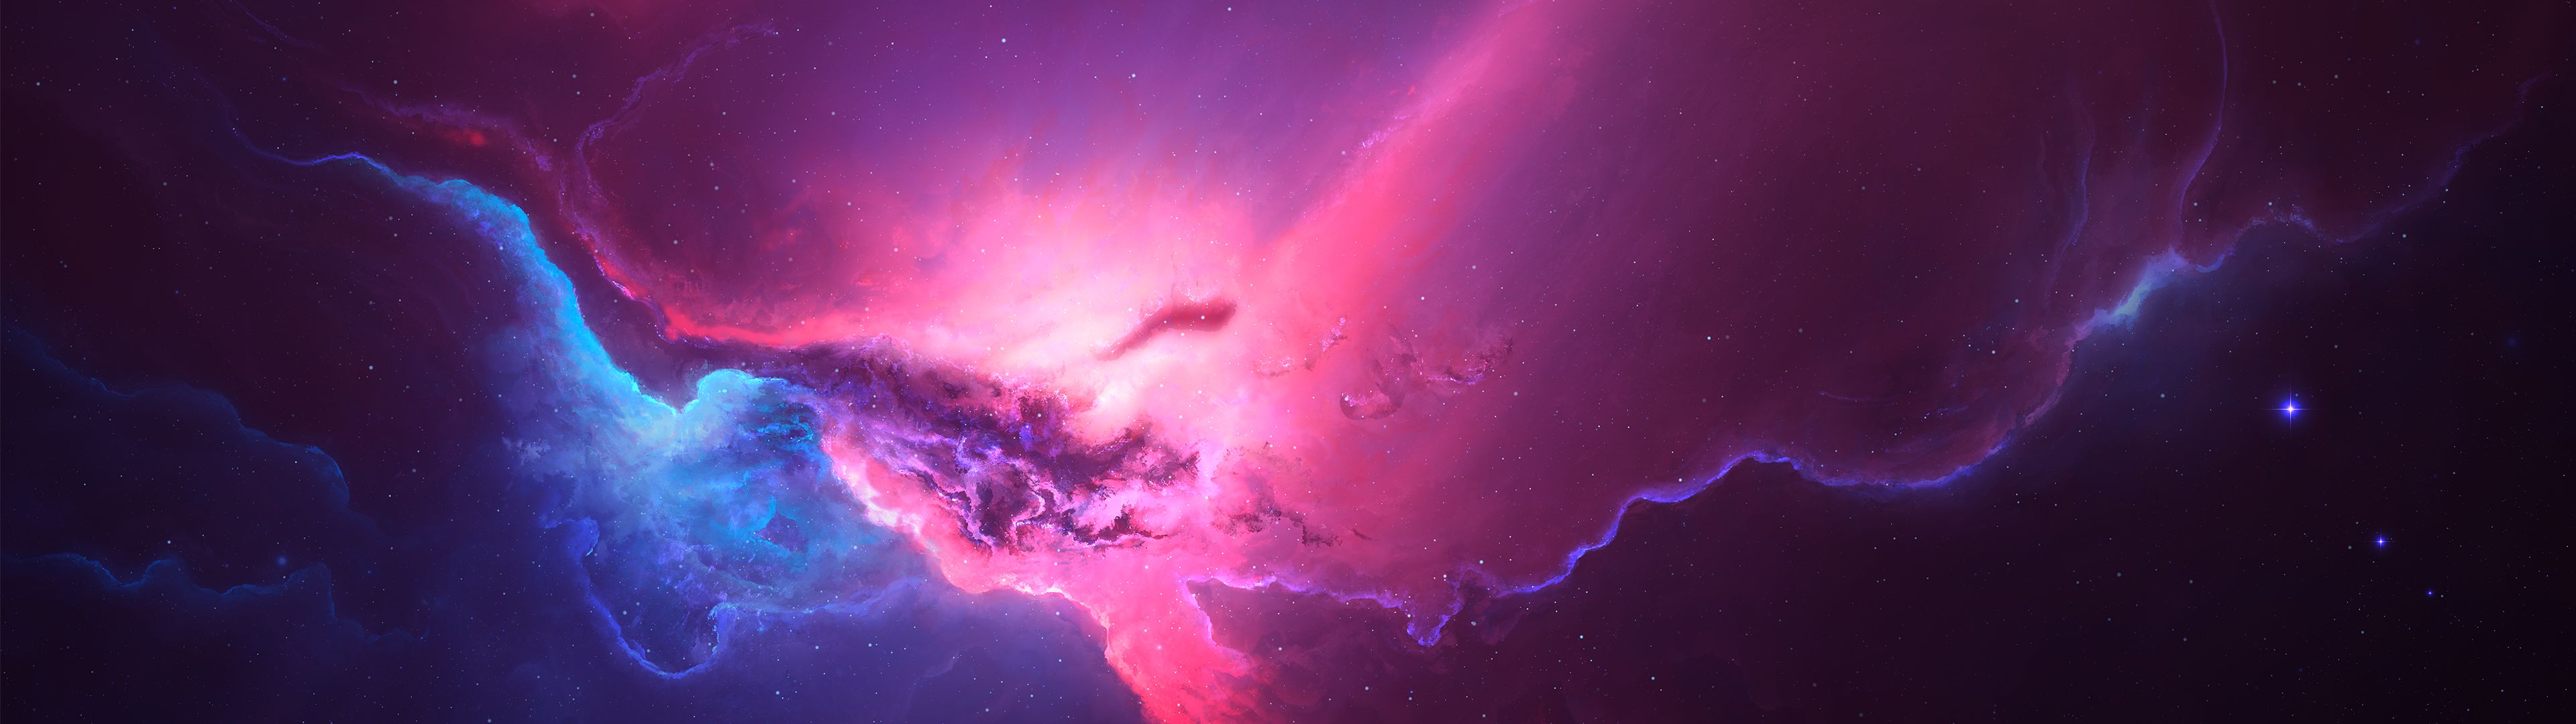 pink, space, sci fi, nebula, blue, cosmos, red